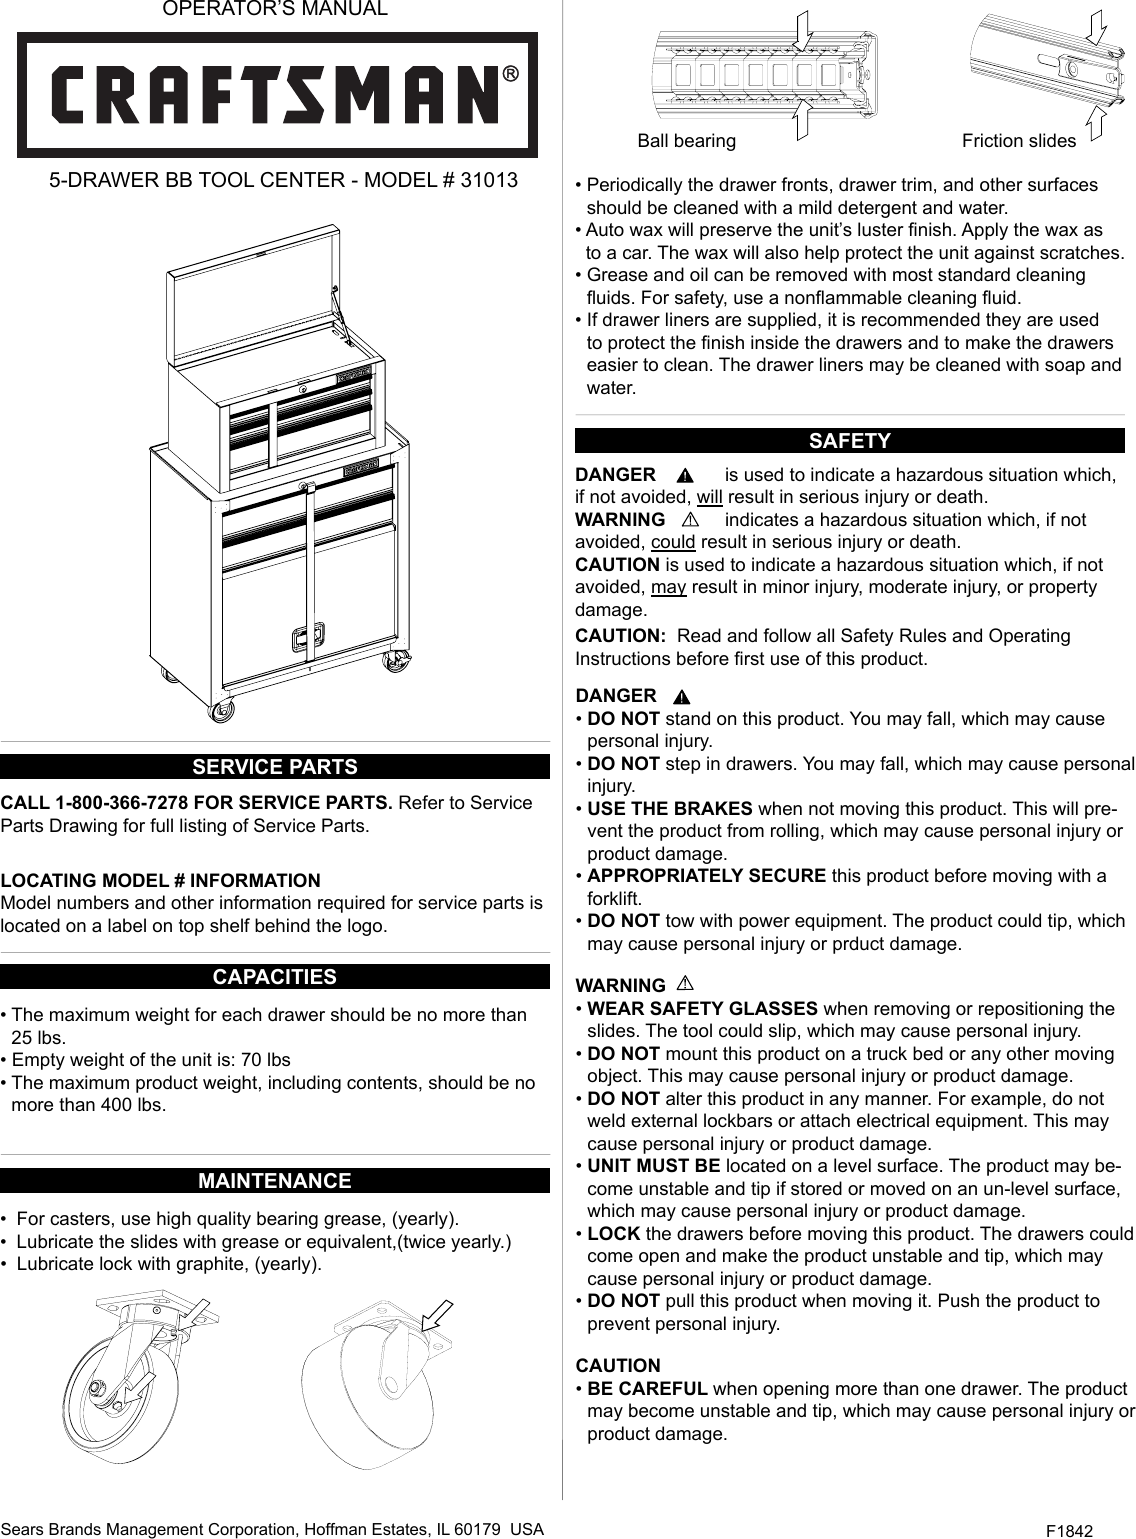 Page 1 of 8 - Craftsman Craftsman-5-Drawer-Standard-Duty-Ball-Bearing-Tool-Center-Black-Use-And-Care-Manual-  Craftsman-5-drawer-standard-duty-ball-bearing-tool-center-black-use-and-care-manual